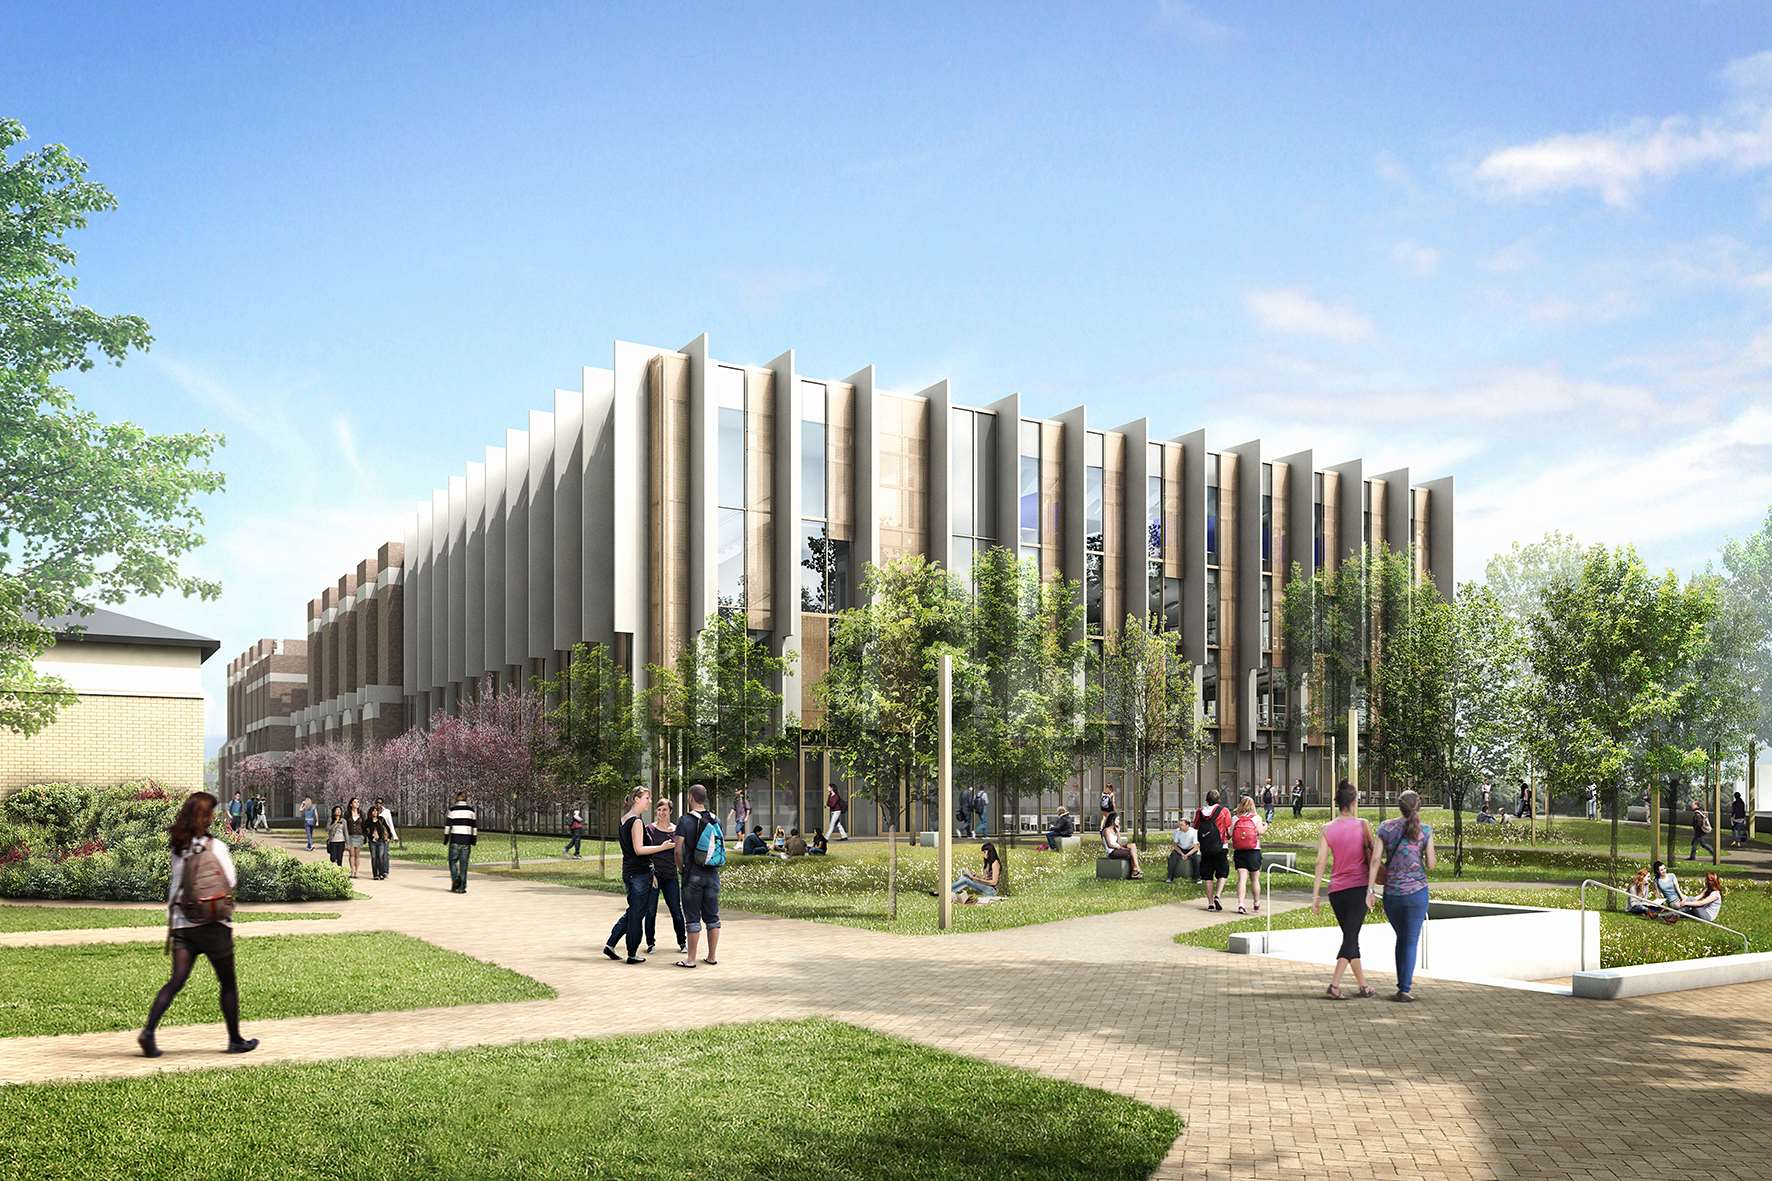 Work has already begun on the new Templeman Library